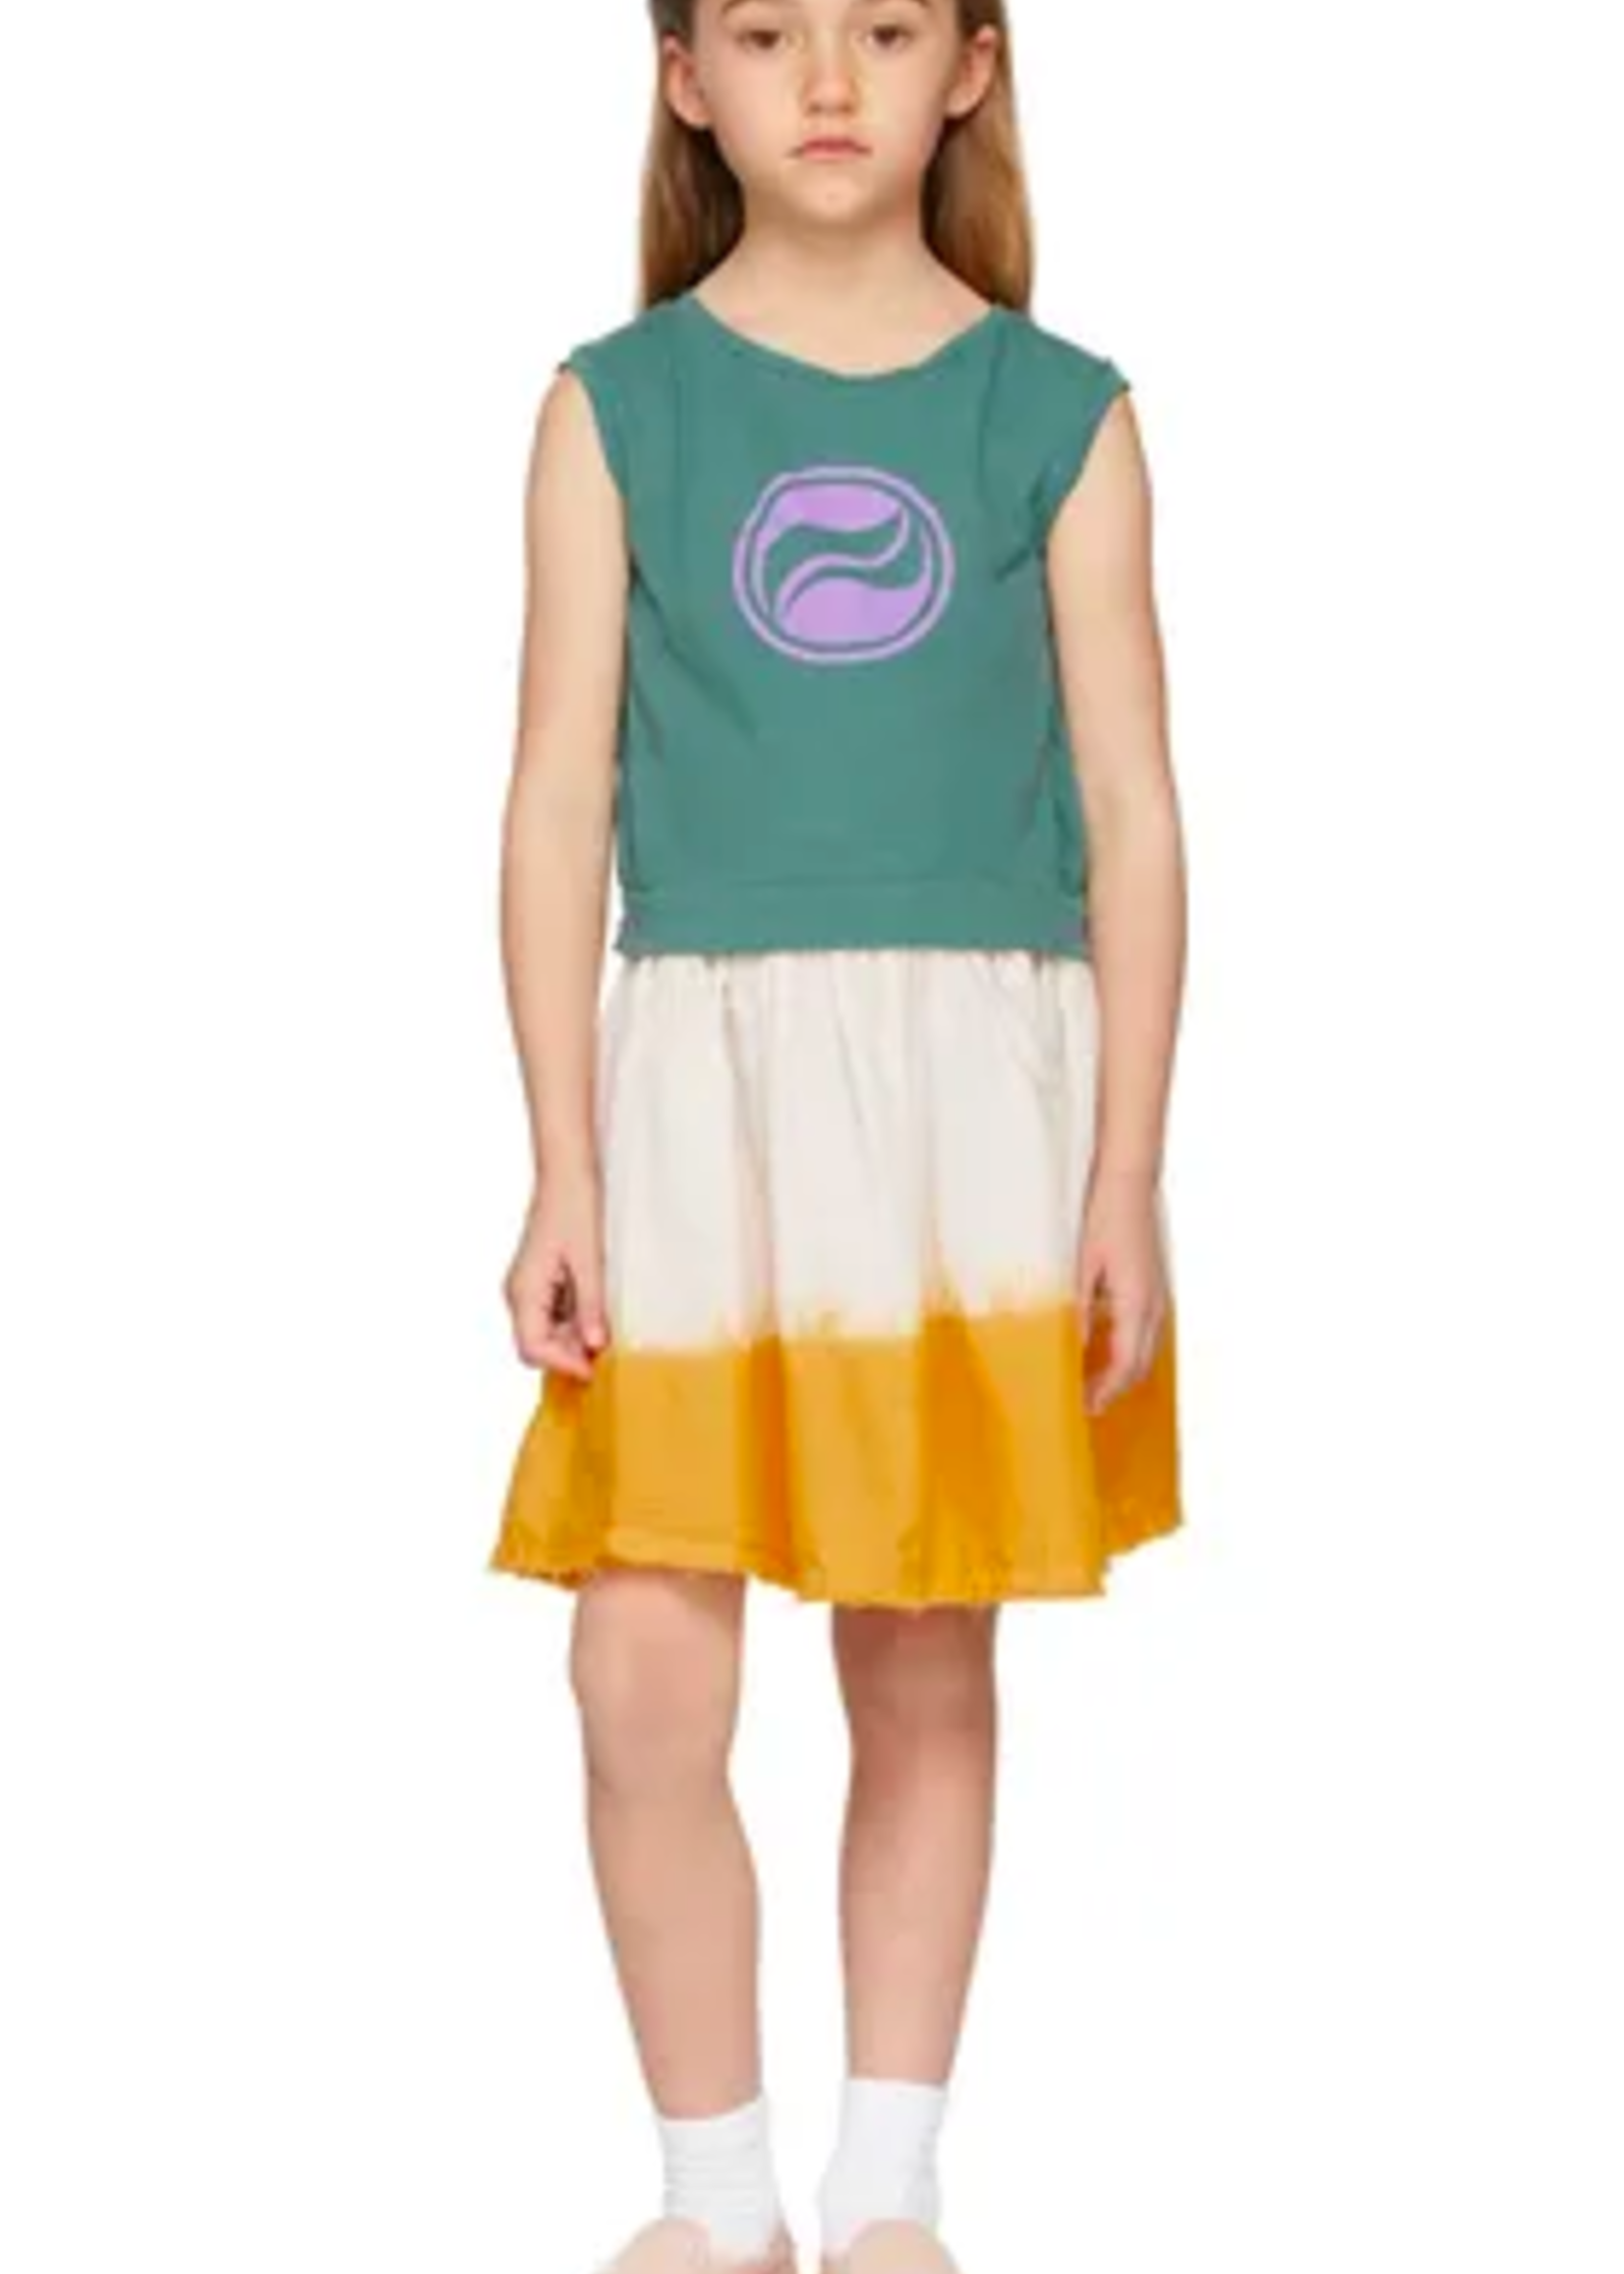 Long Live The Queen Sleeveless shirt Yellow print 8-10y